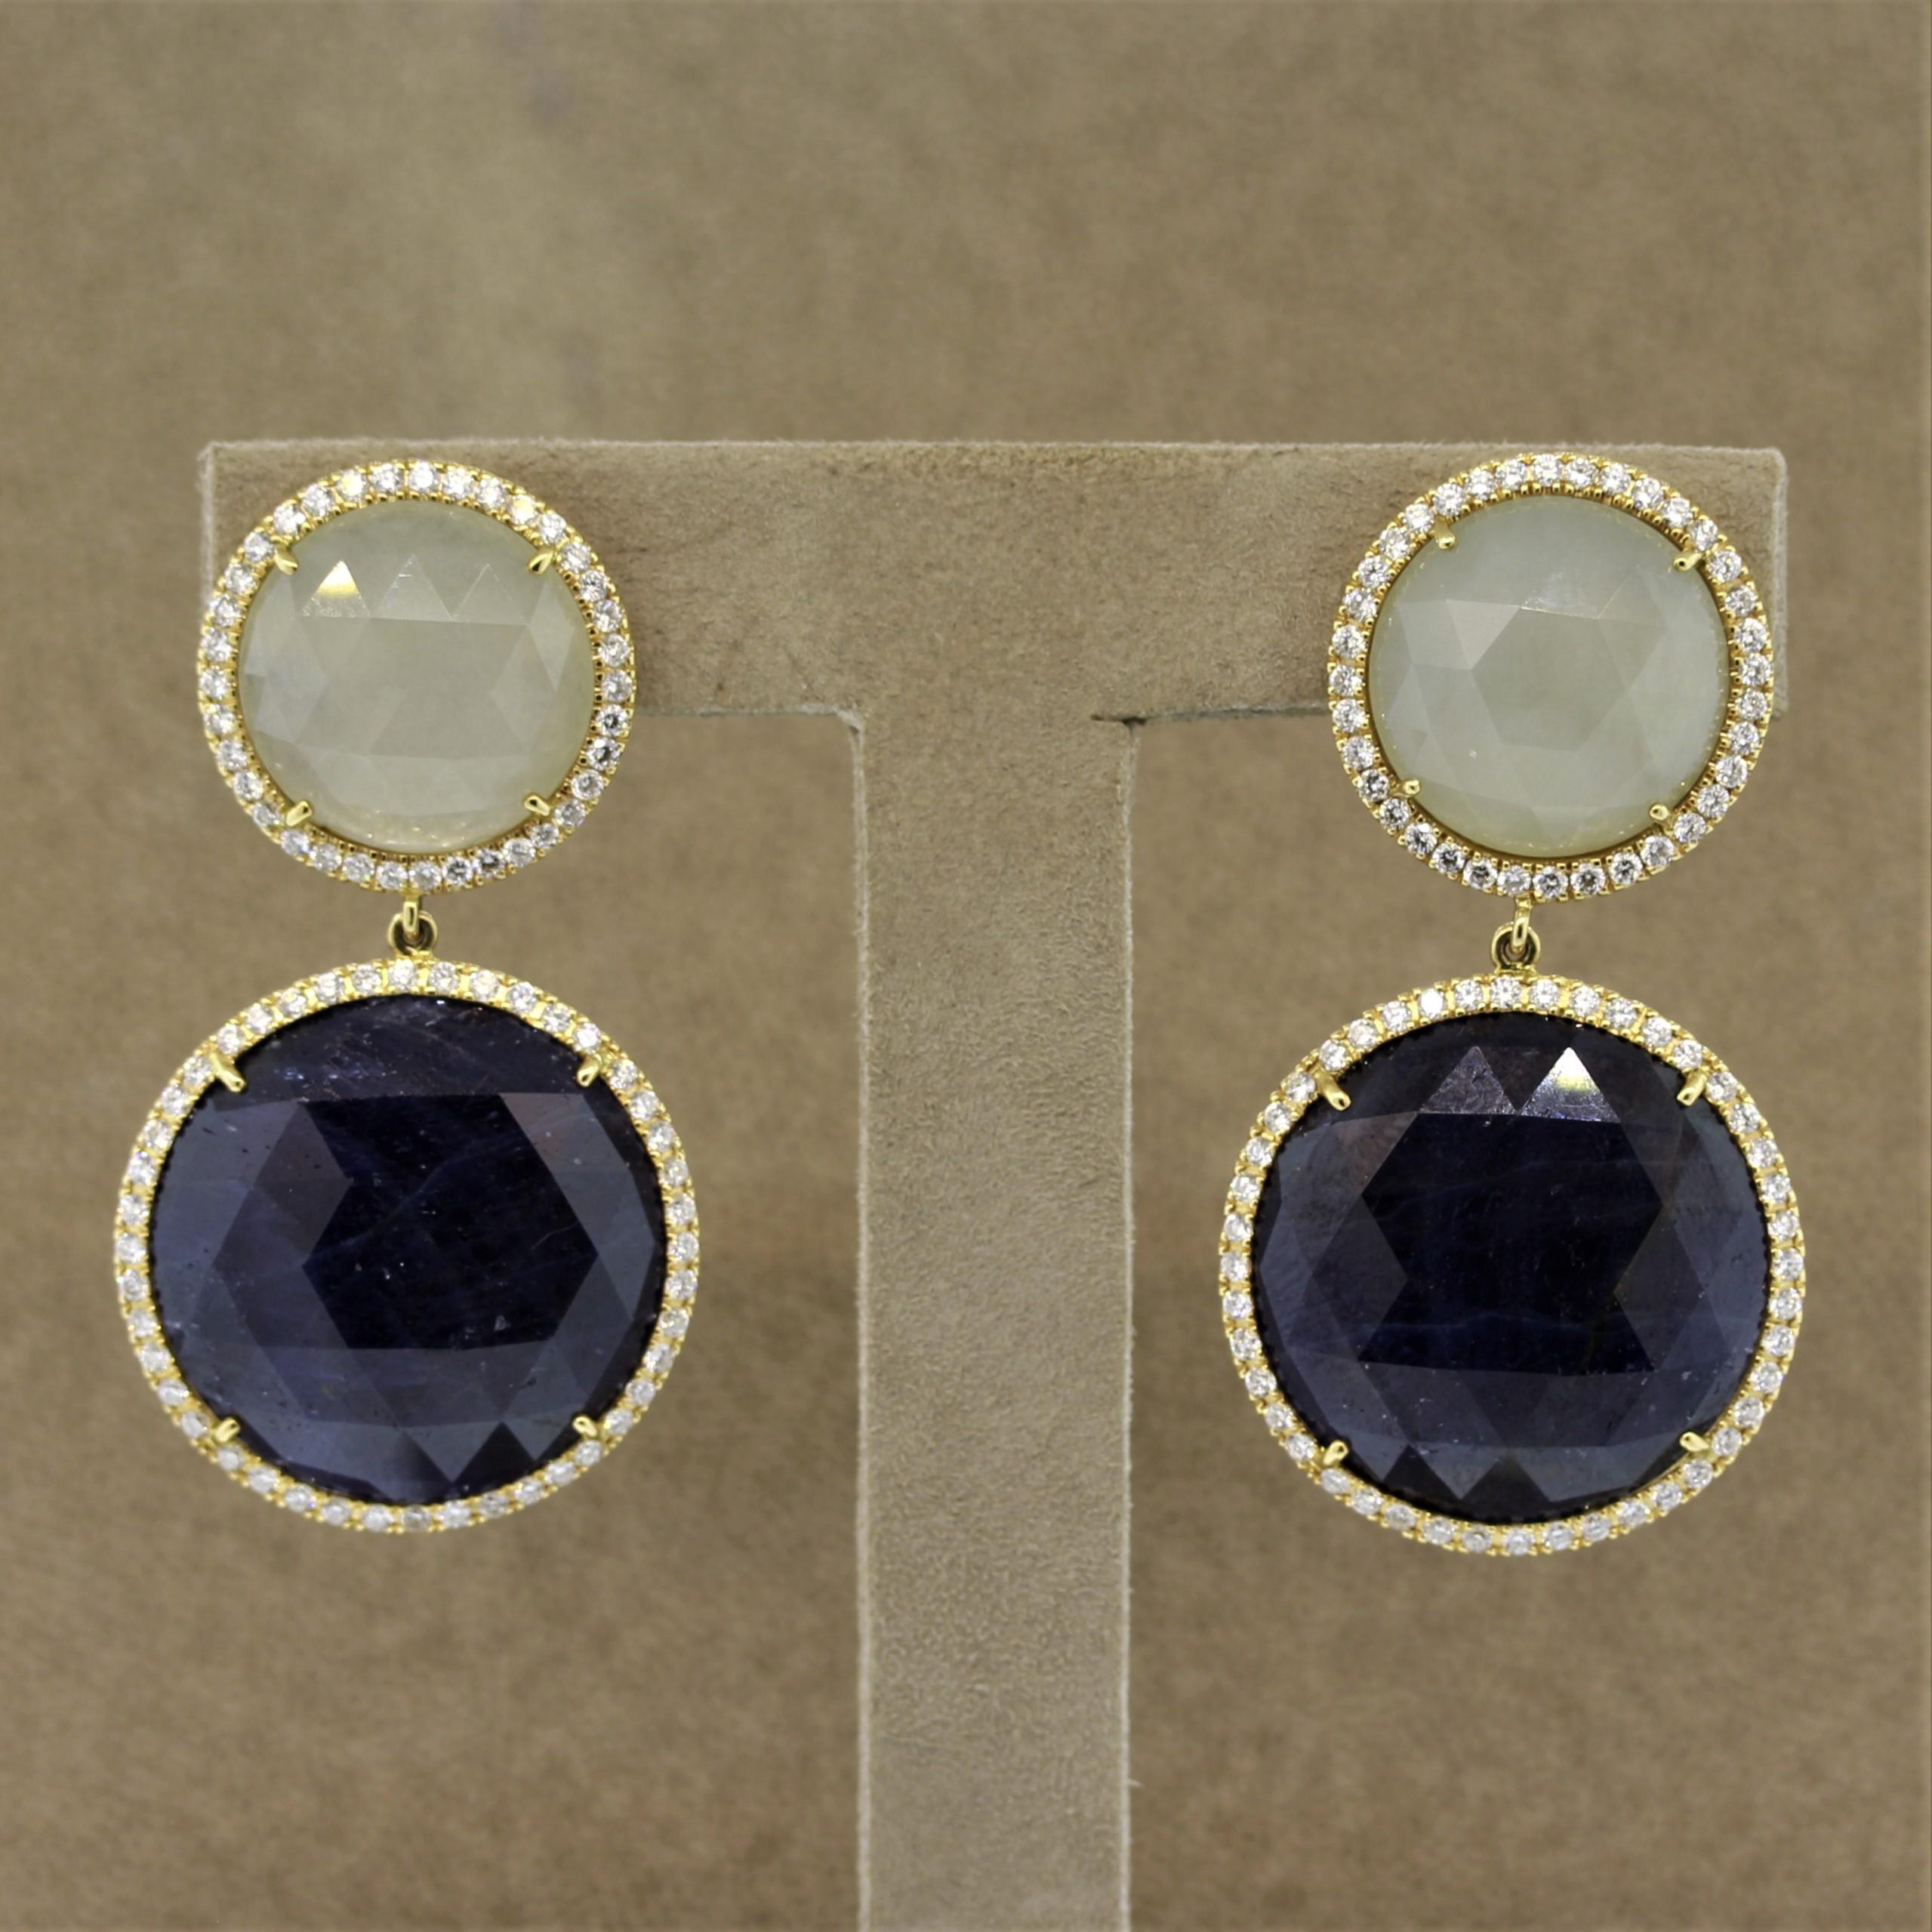 A unique pair of earrings featuring a total of 60 carats of sapphire! Each earring has a larger blue sapphire set below a white sapphire which are all rose cut. There are 3.00 carats of round brilliant cut diamonds set in 18k gold which halo the